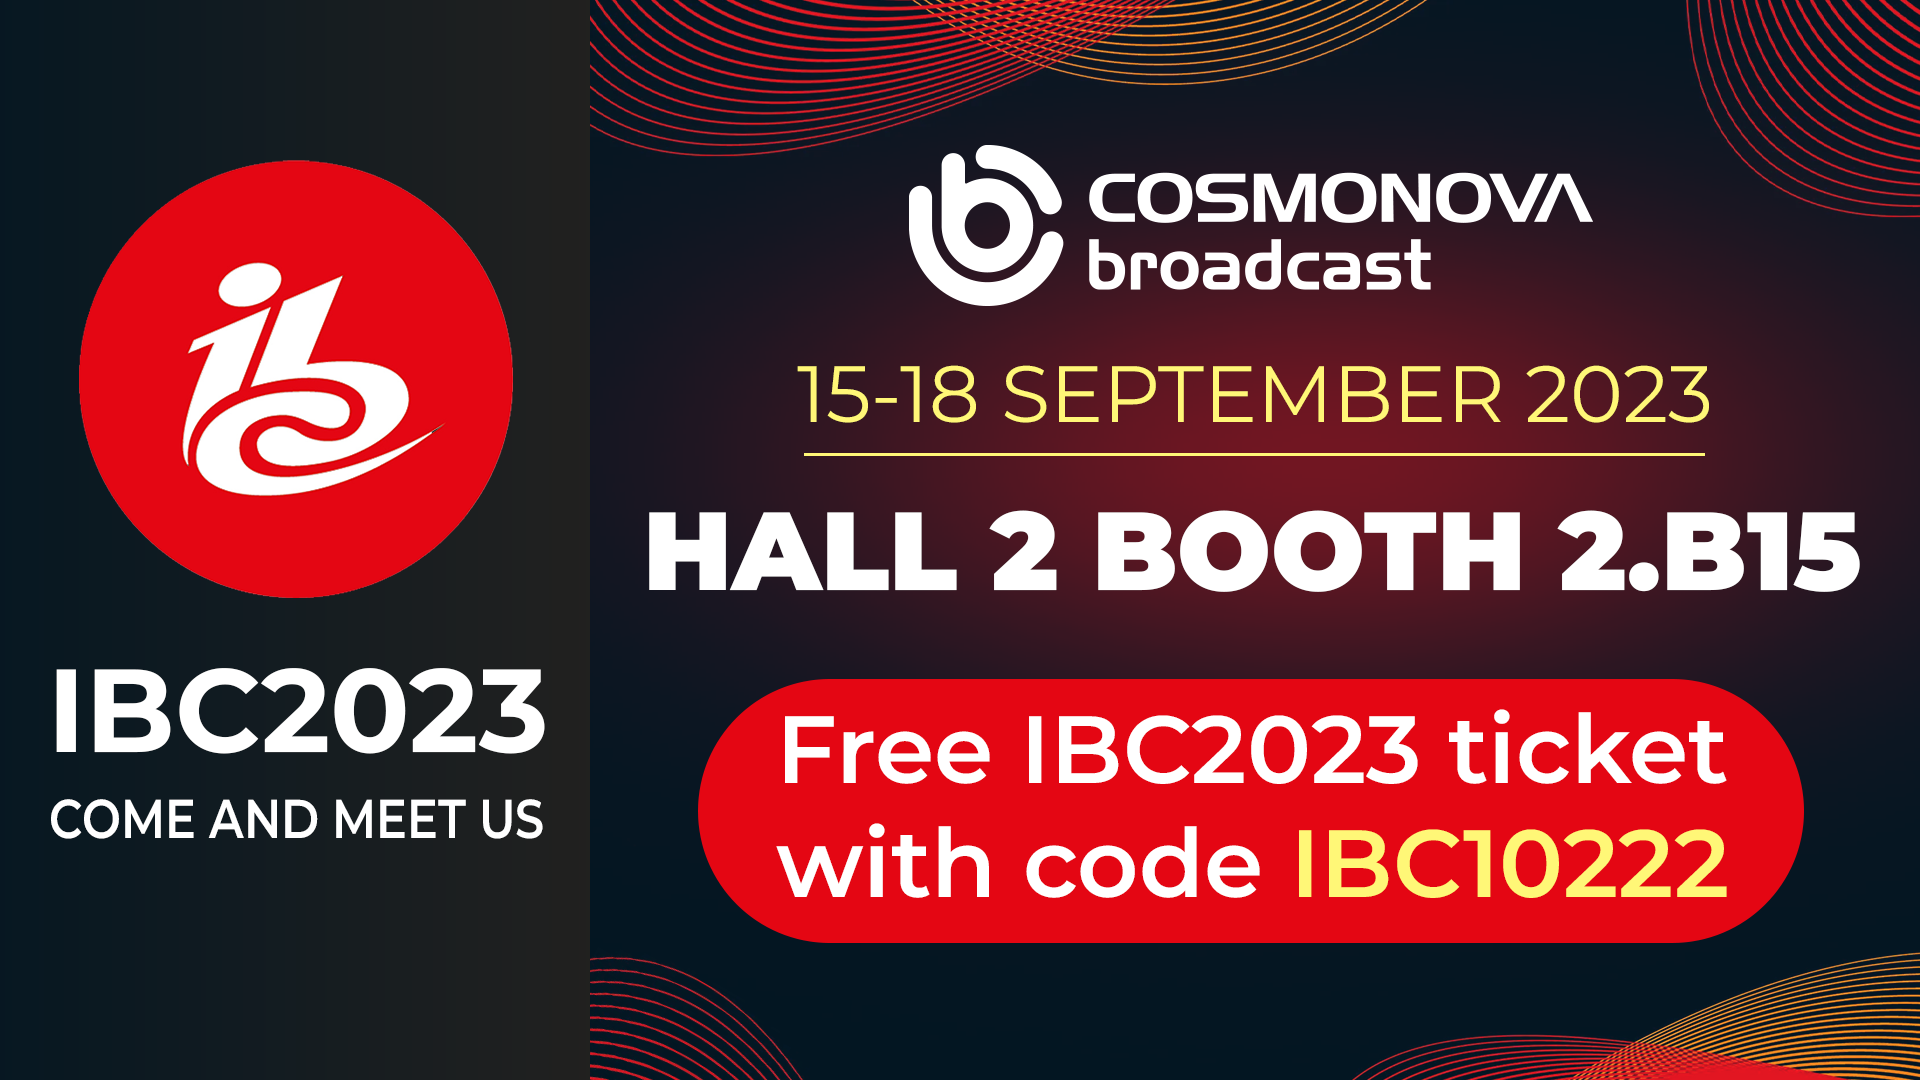 Photo: Cosmonova Broadcast is looking forward to meet you at IBC2023!